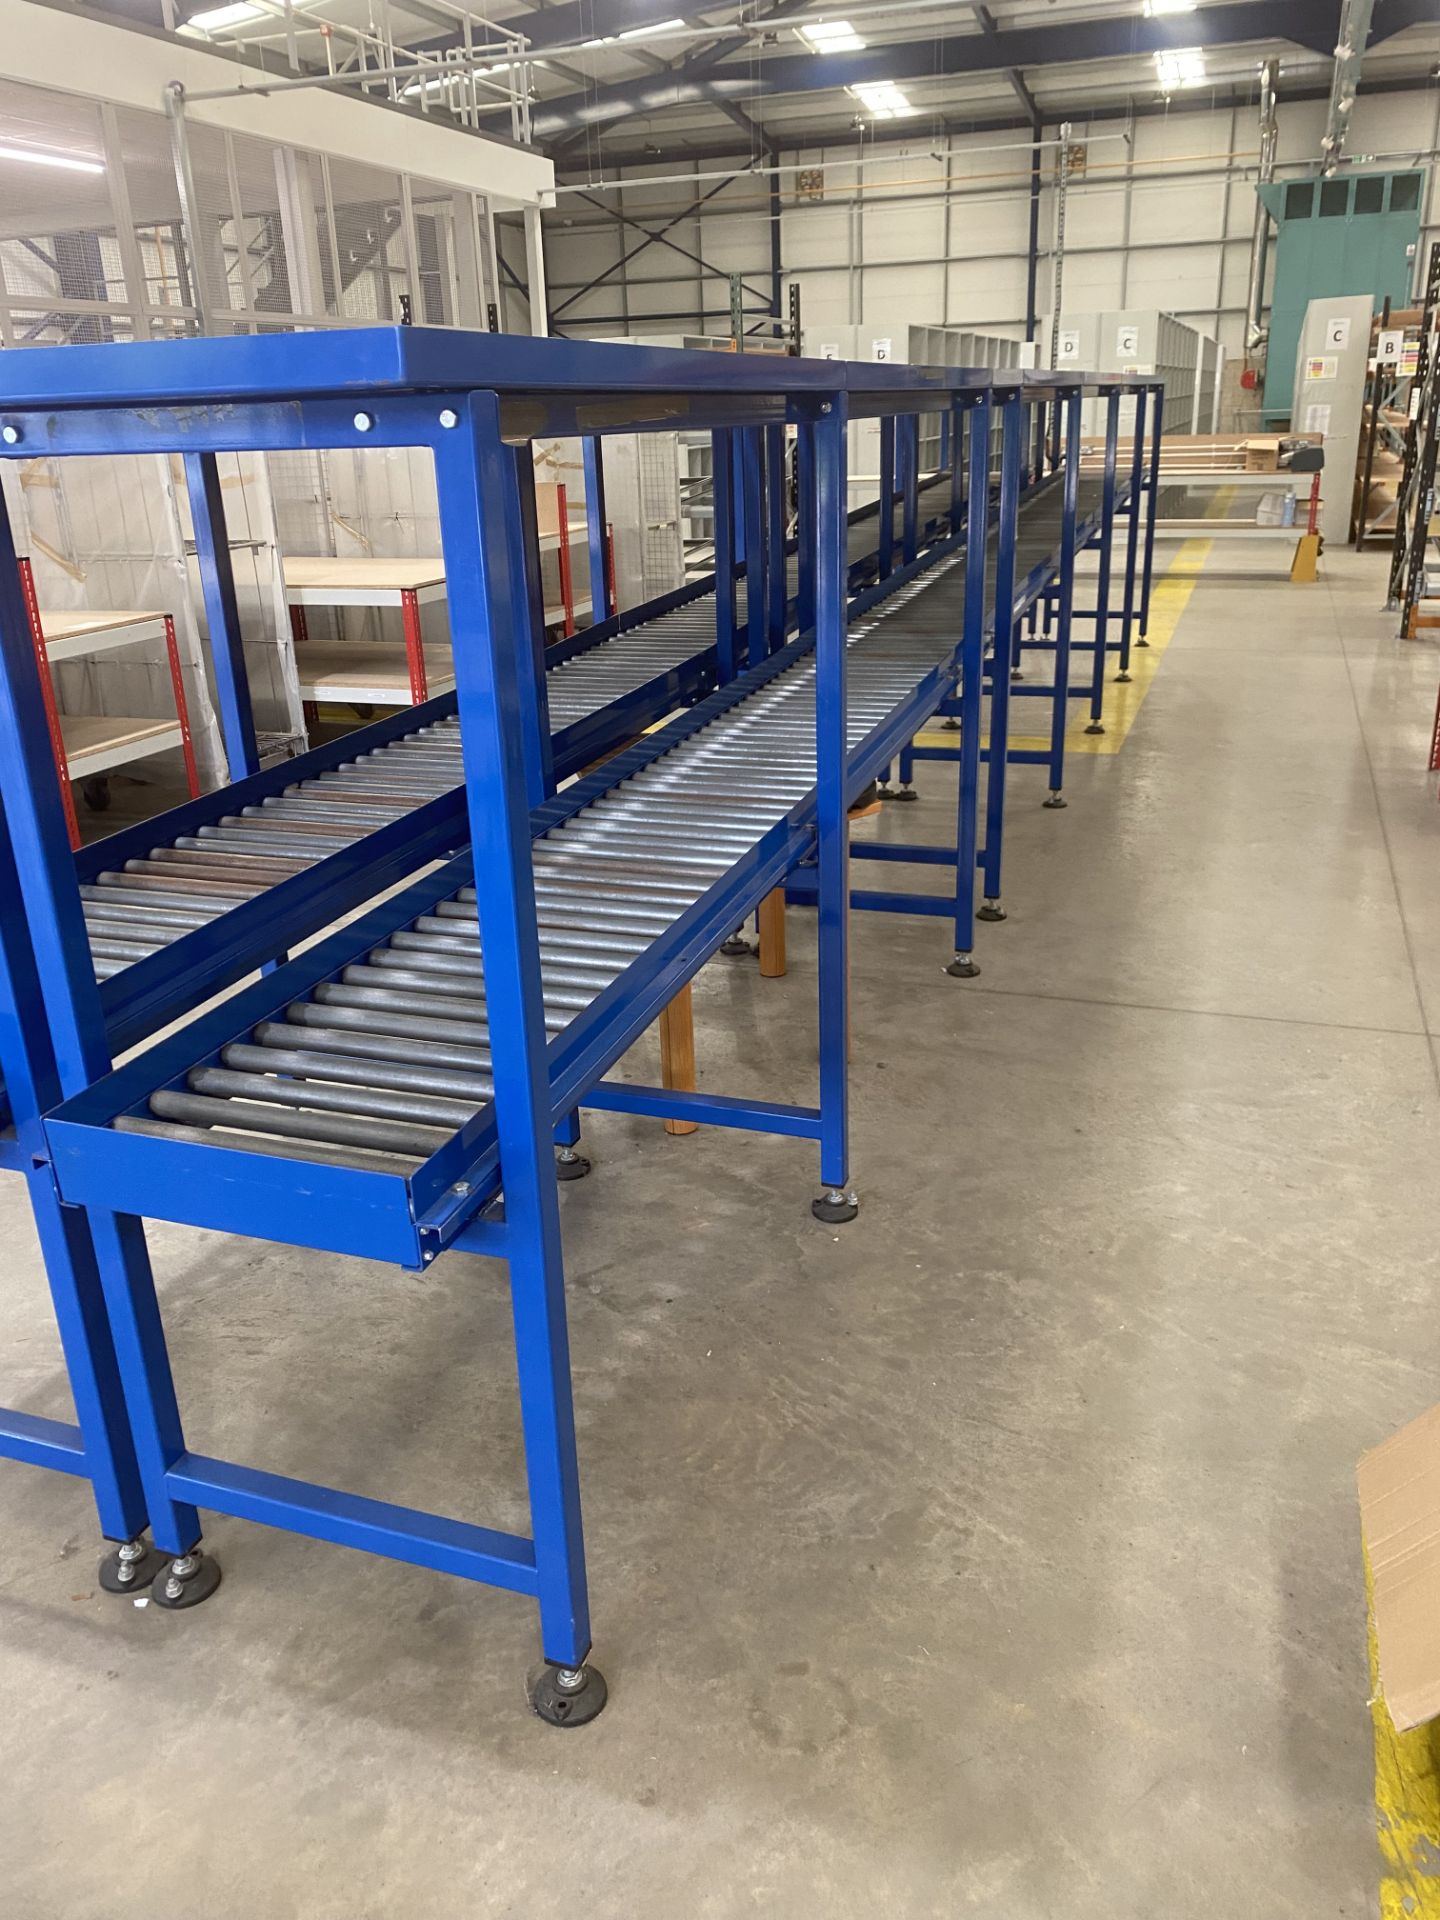 WAREHOUSE ROLLER CONVEYOR SYSTEM WITH TOP SHELF STORAGE 9.5M (3 SECTIONS OF 3M - CAN BE DISMANTLED) - Image 5 of 5